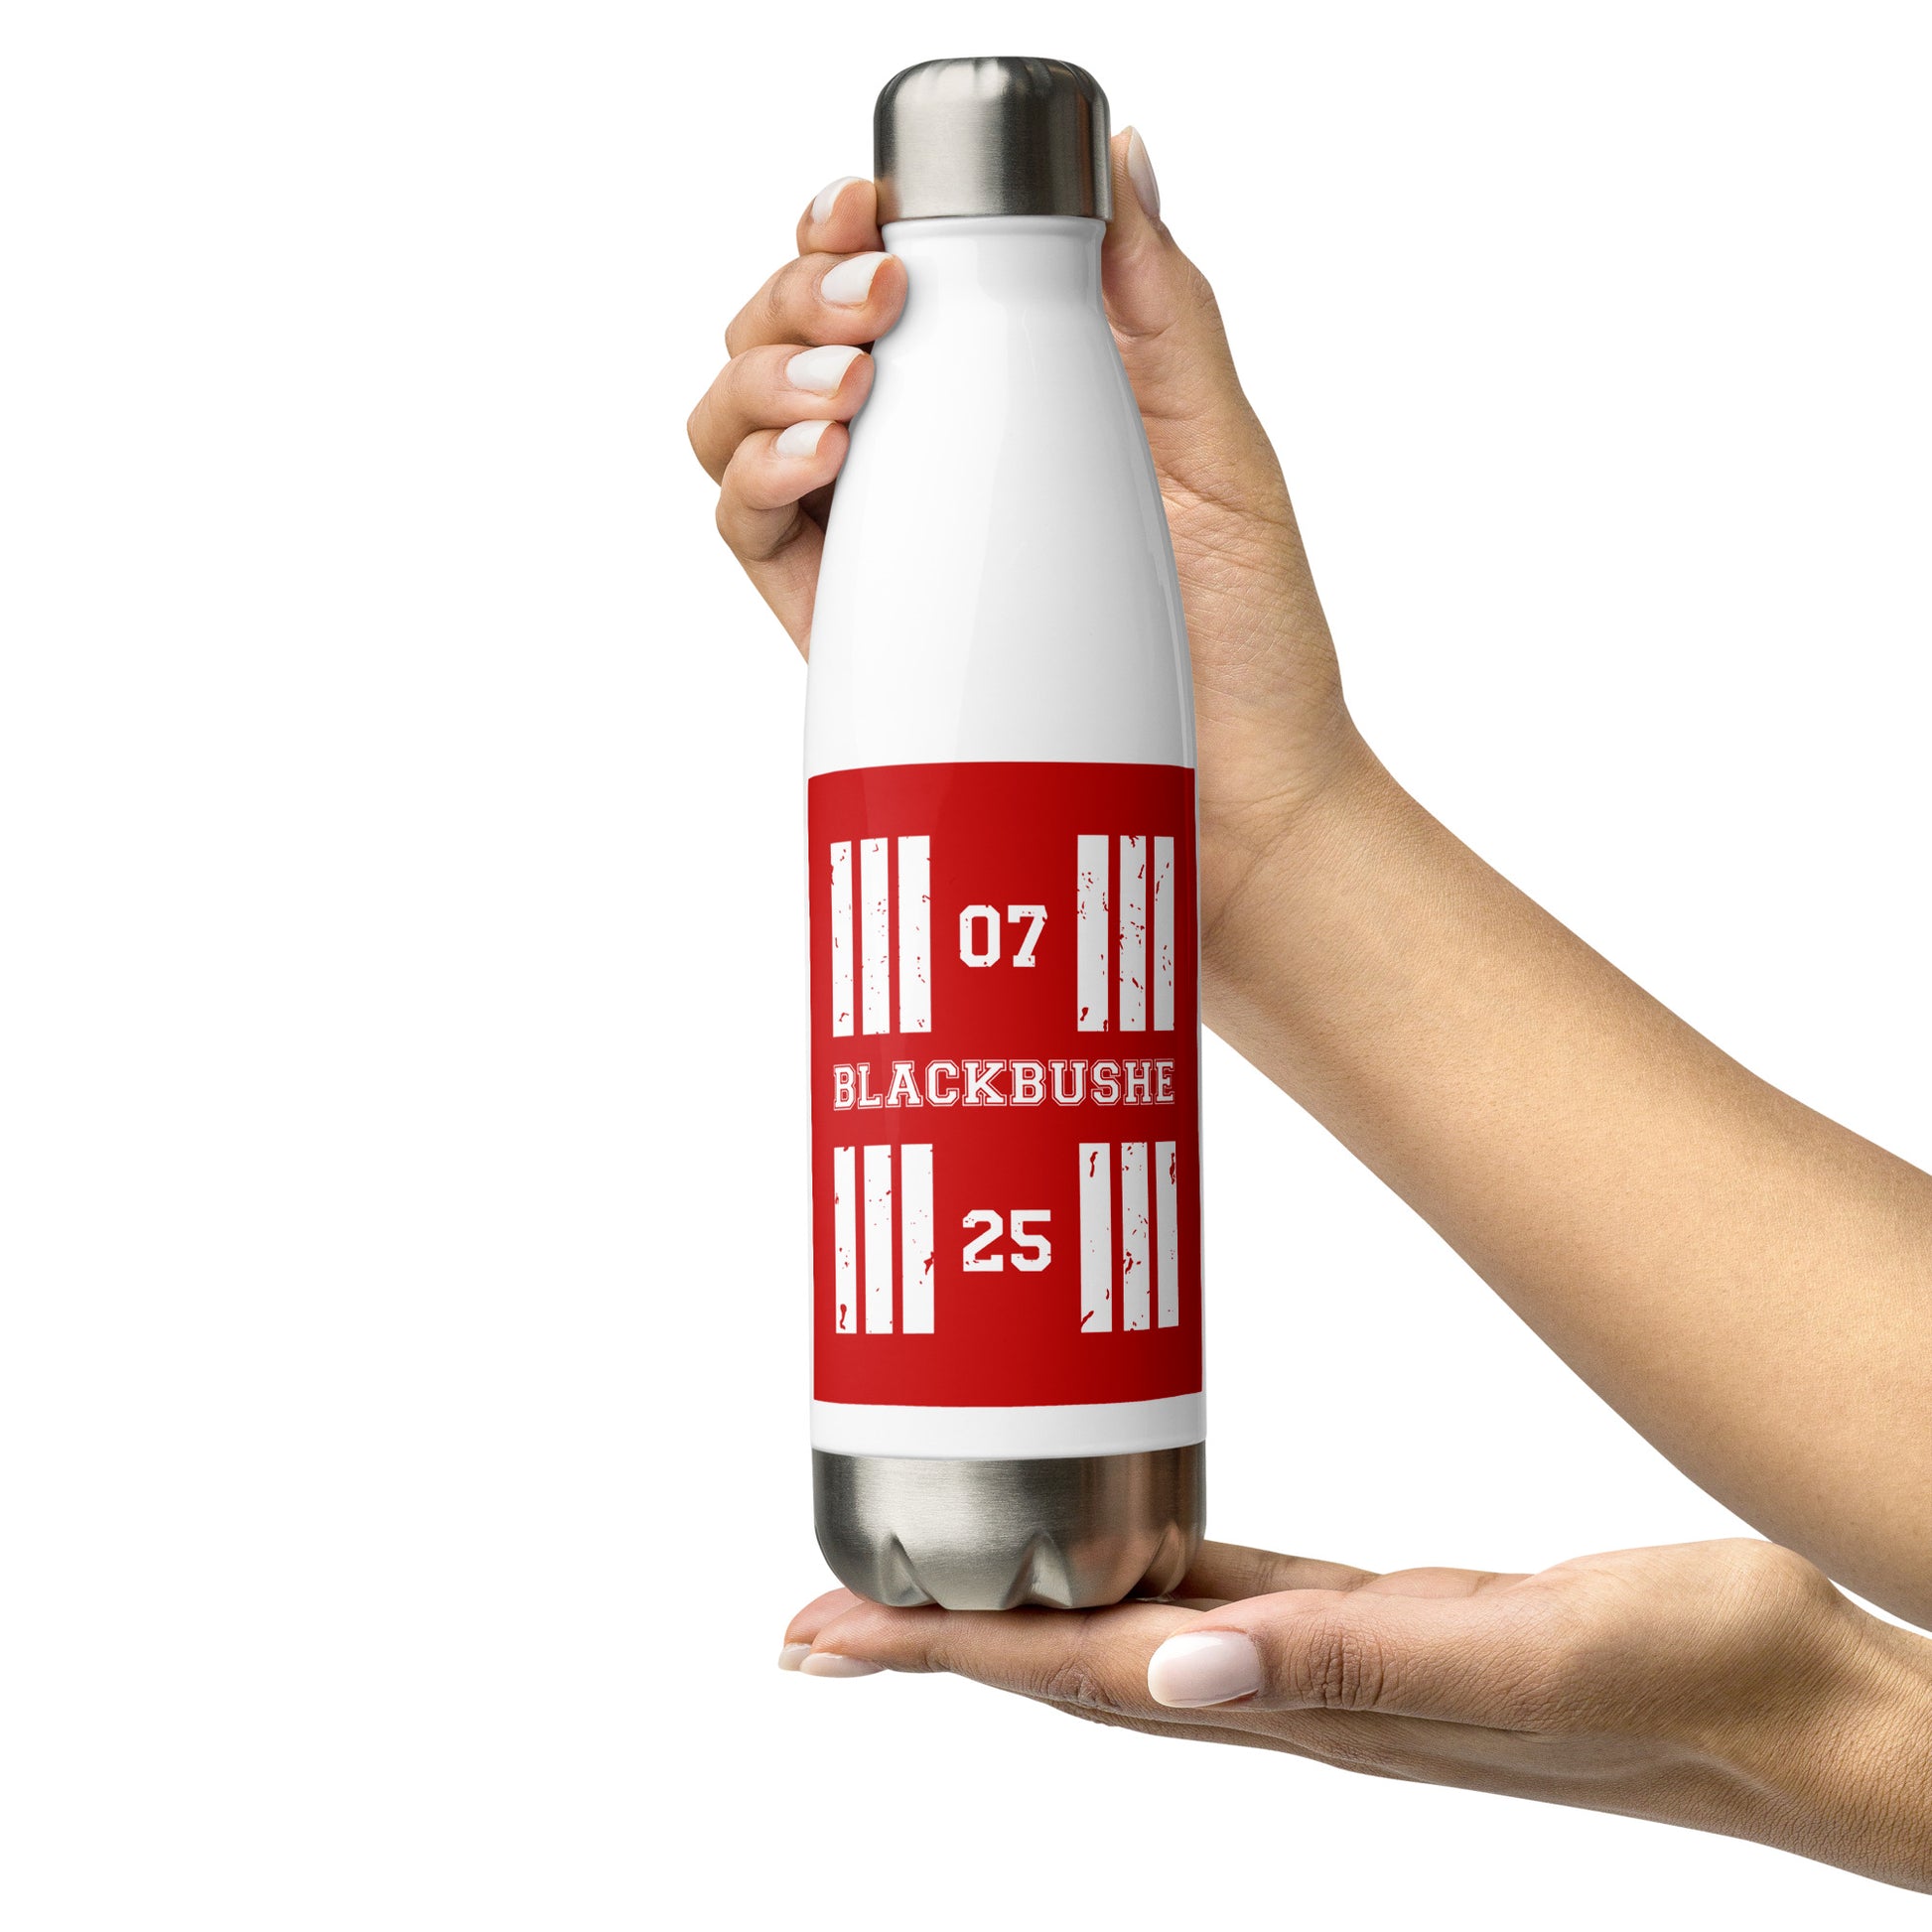 The Blackbushe Airport runway designator water bottle features a red print with the airport's name and designator framed by stylised threshold markings showing through.